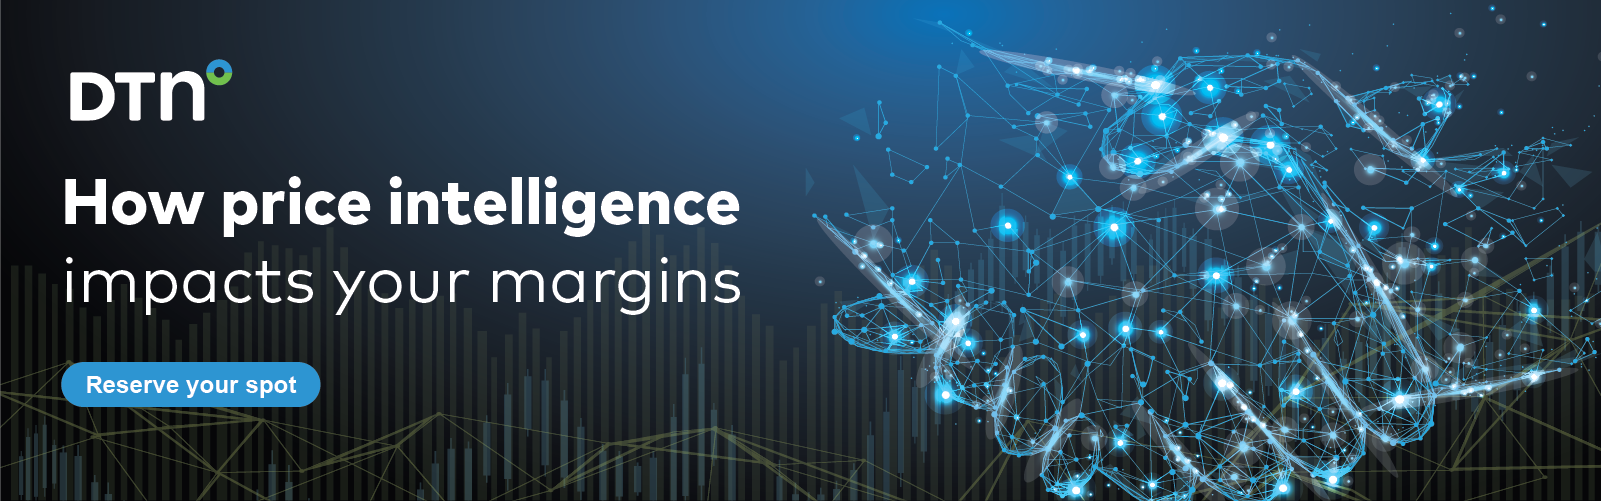 How price intelligence impacts your margins